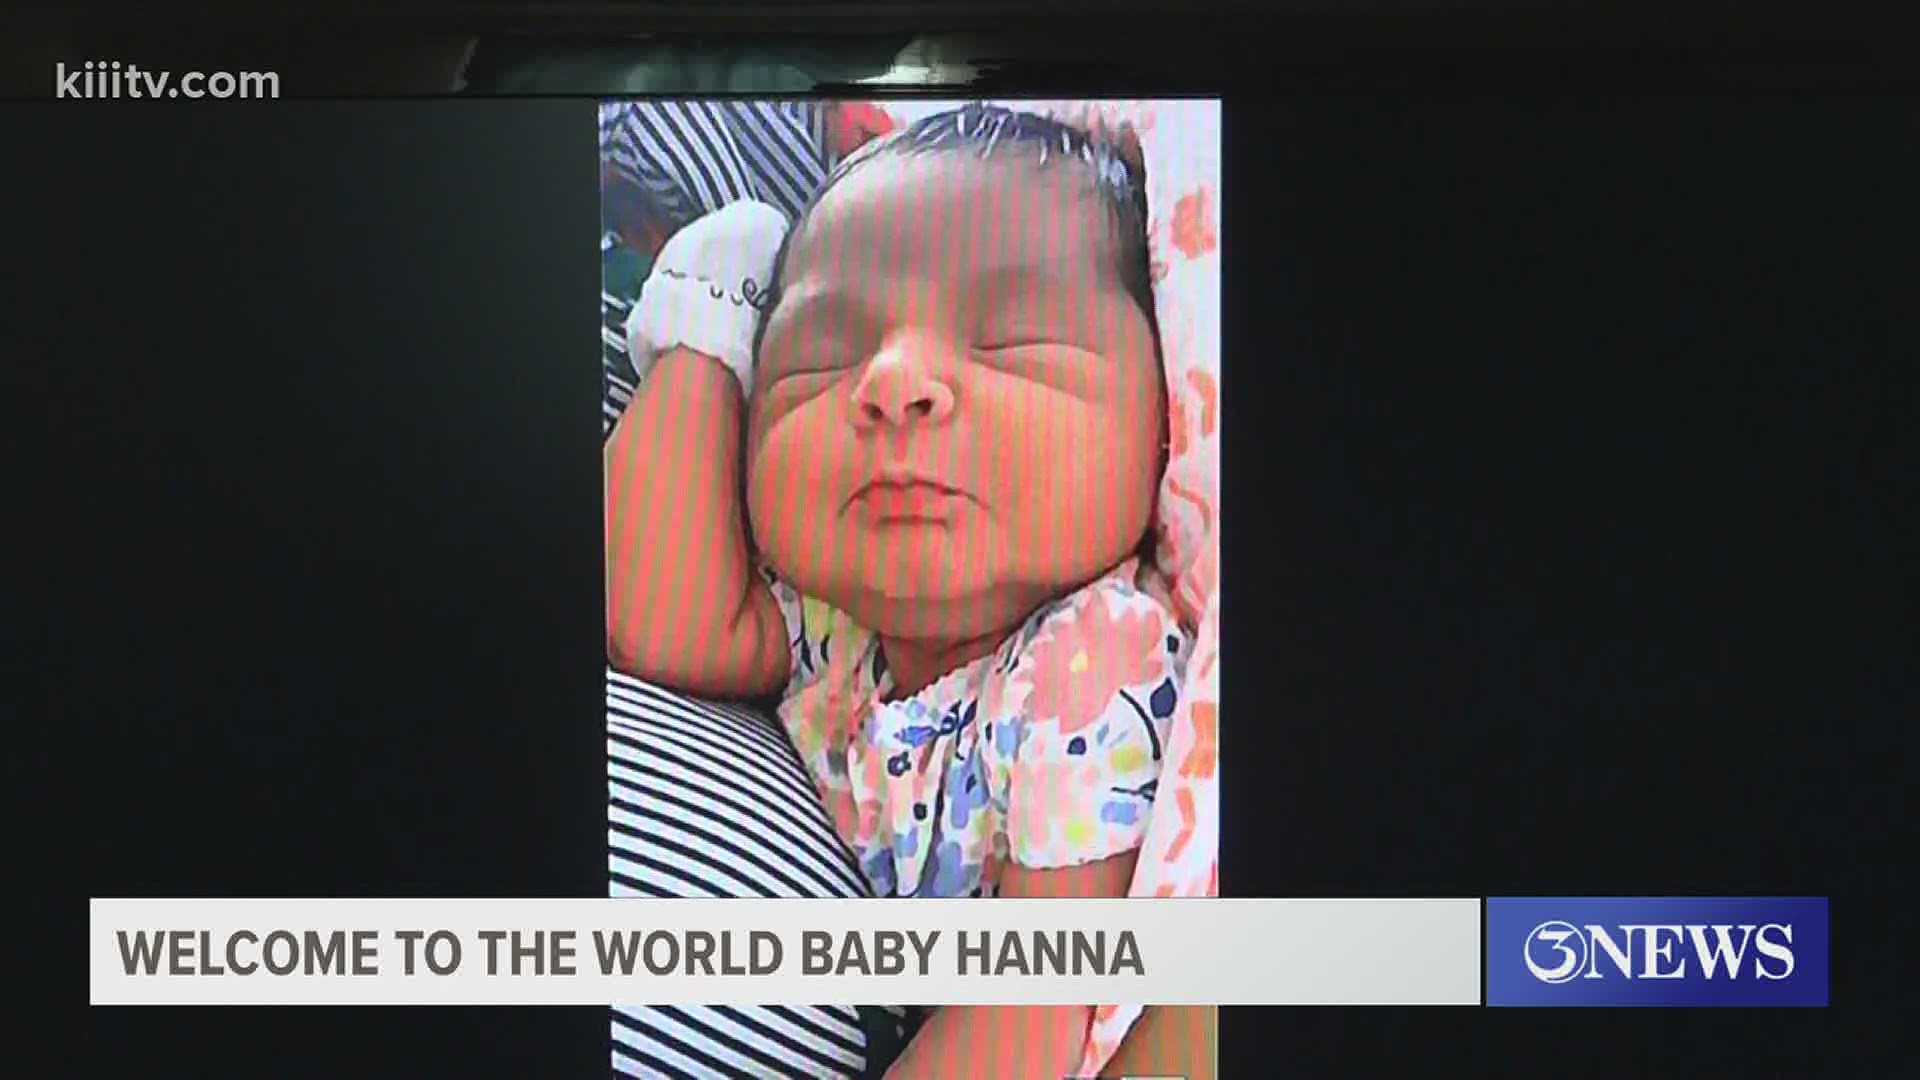 Not only was she two weeks early, she made her appearance about an hour before Hurricane Hanna made landfall.